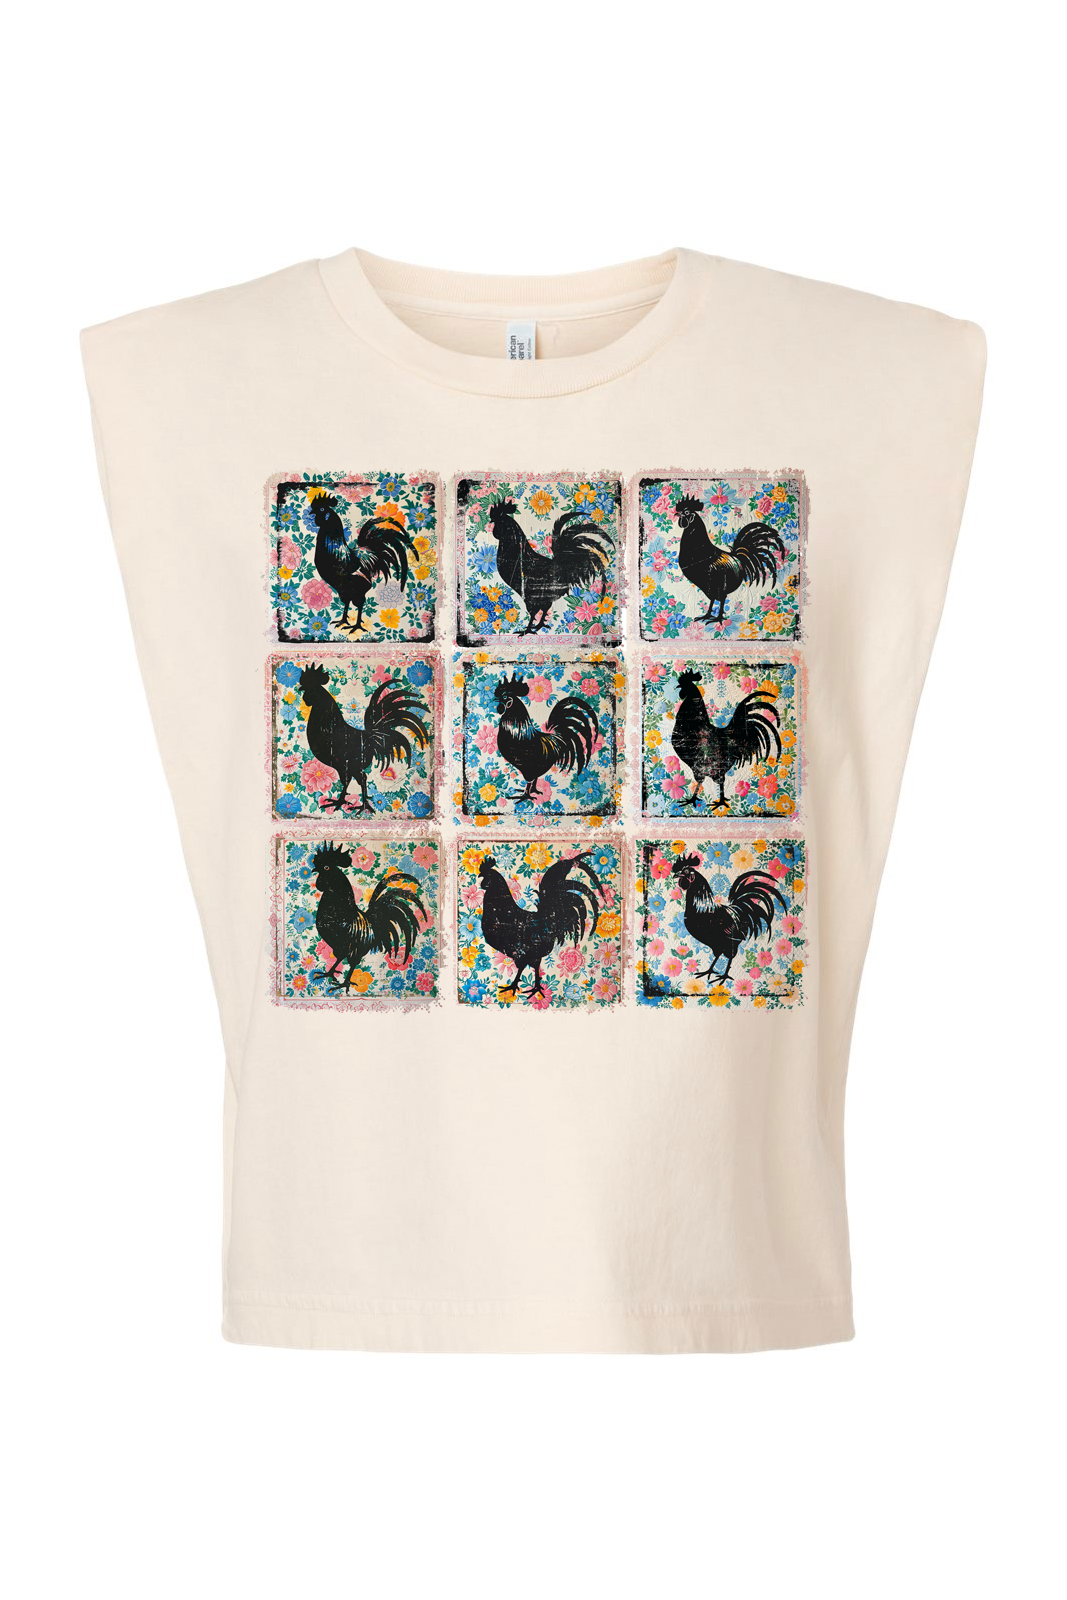 Quilted Granny Chickens Vintage Tee/Tank